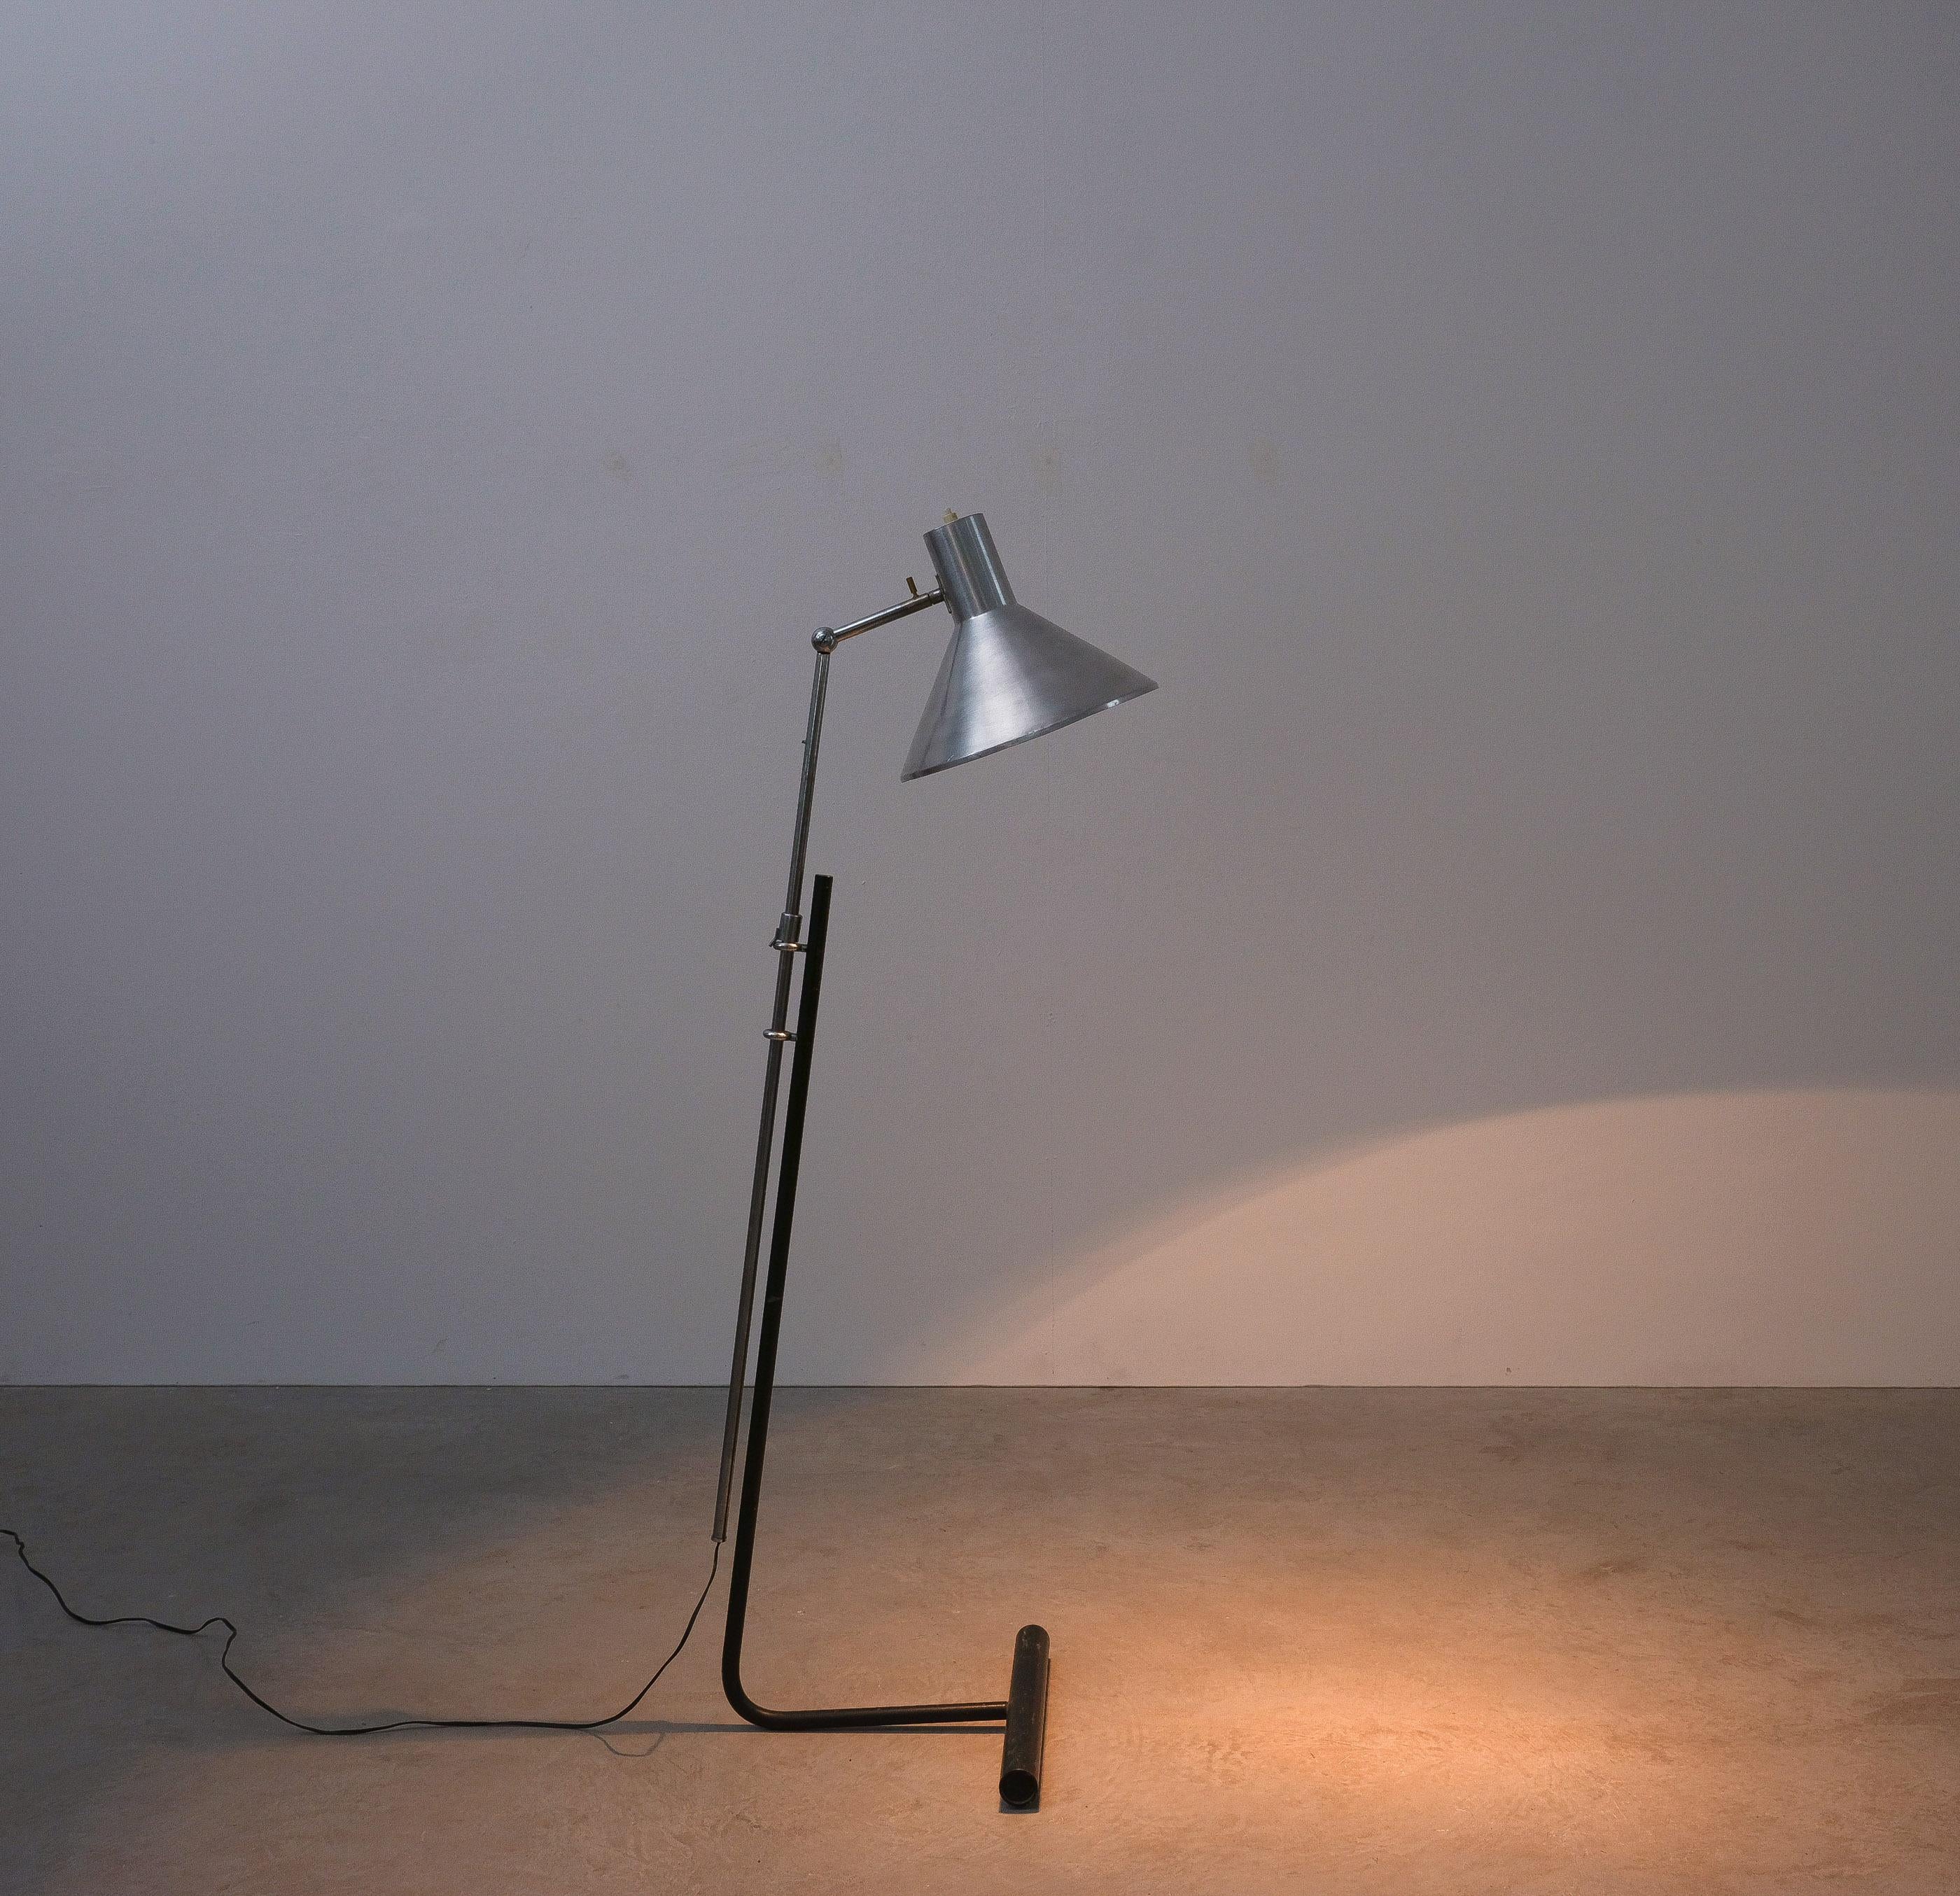 Gino Sarfatti Floor Lamp , model 1045 for Arteluce , Italy designed 1948

Designed in 1948 this example probably dates from the 1950's and shows the rawest version of this famous articulate floor light with aluminum shade and blackened, nickeled